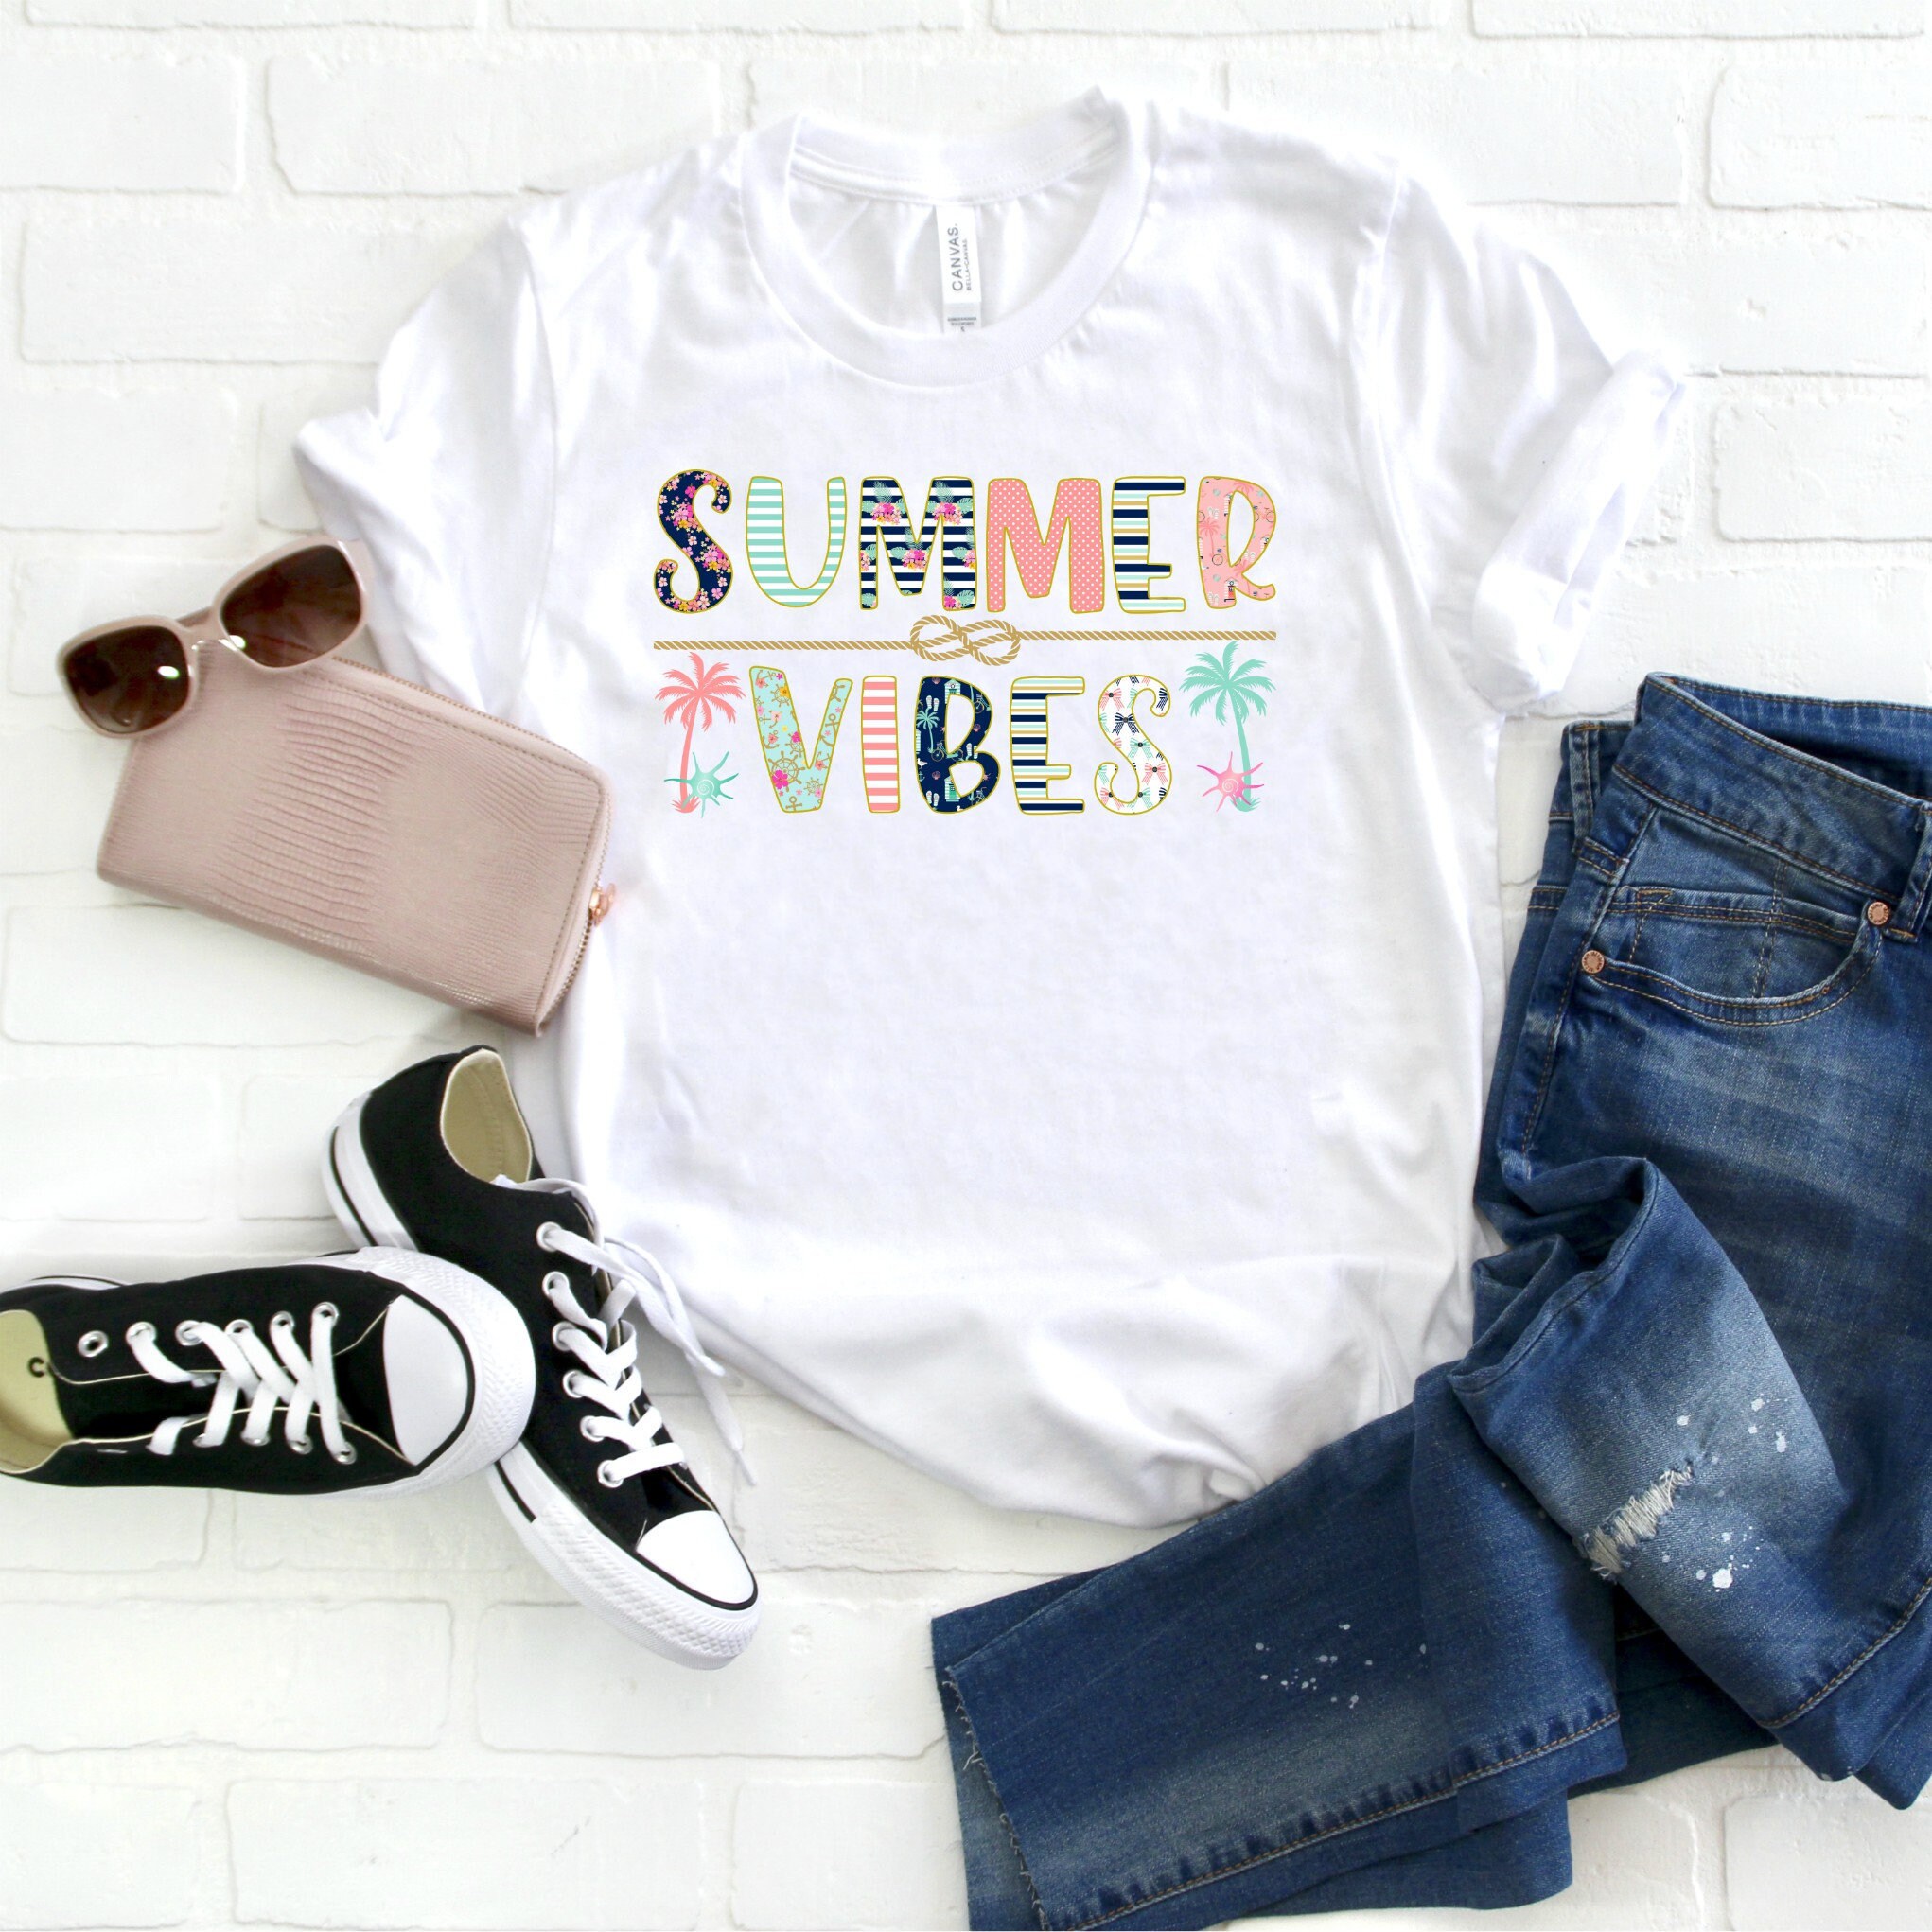 Beach Shirts for Women With Saying Summer Vibes Printed on a